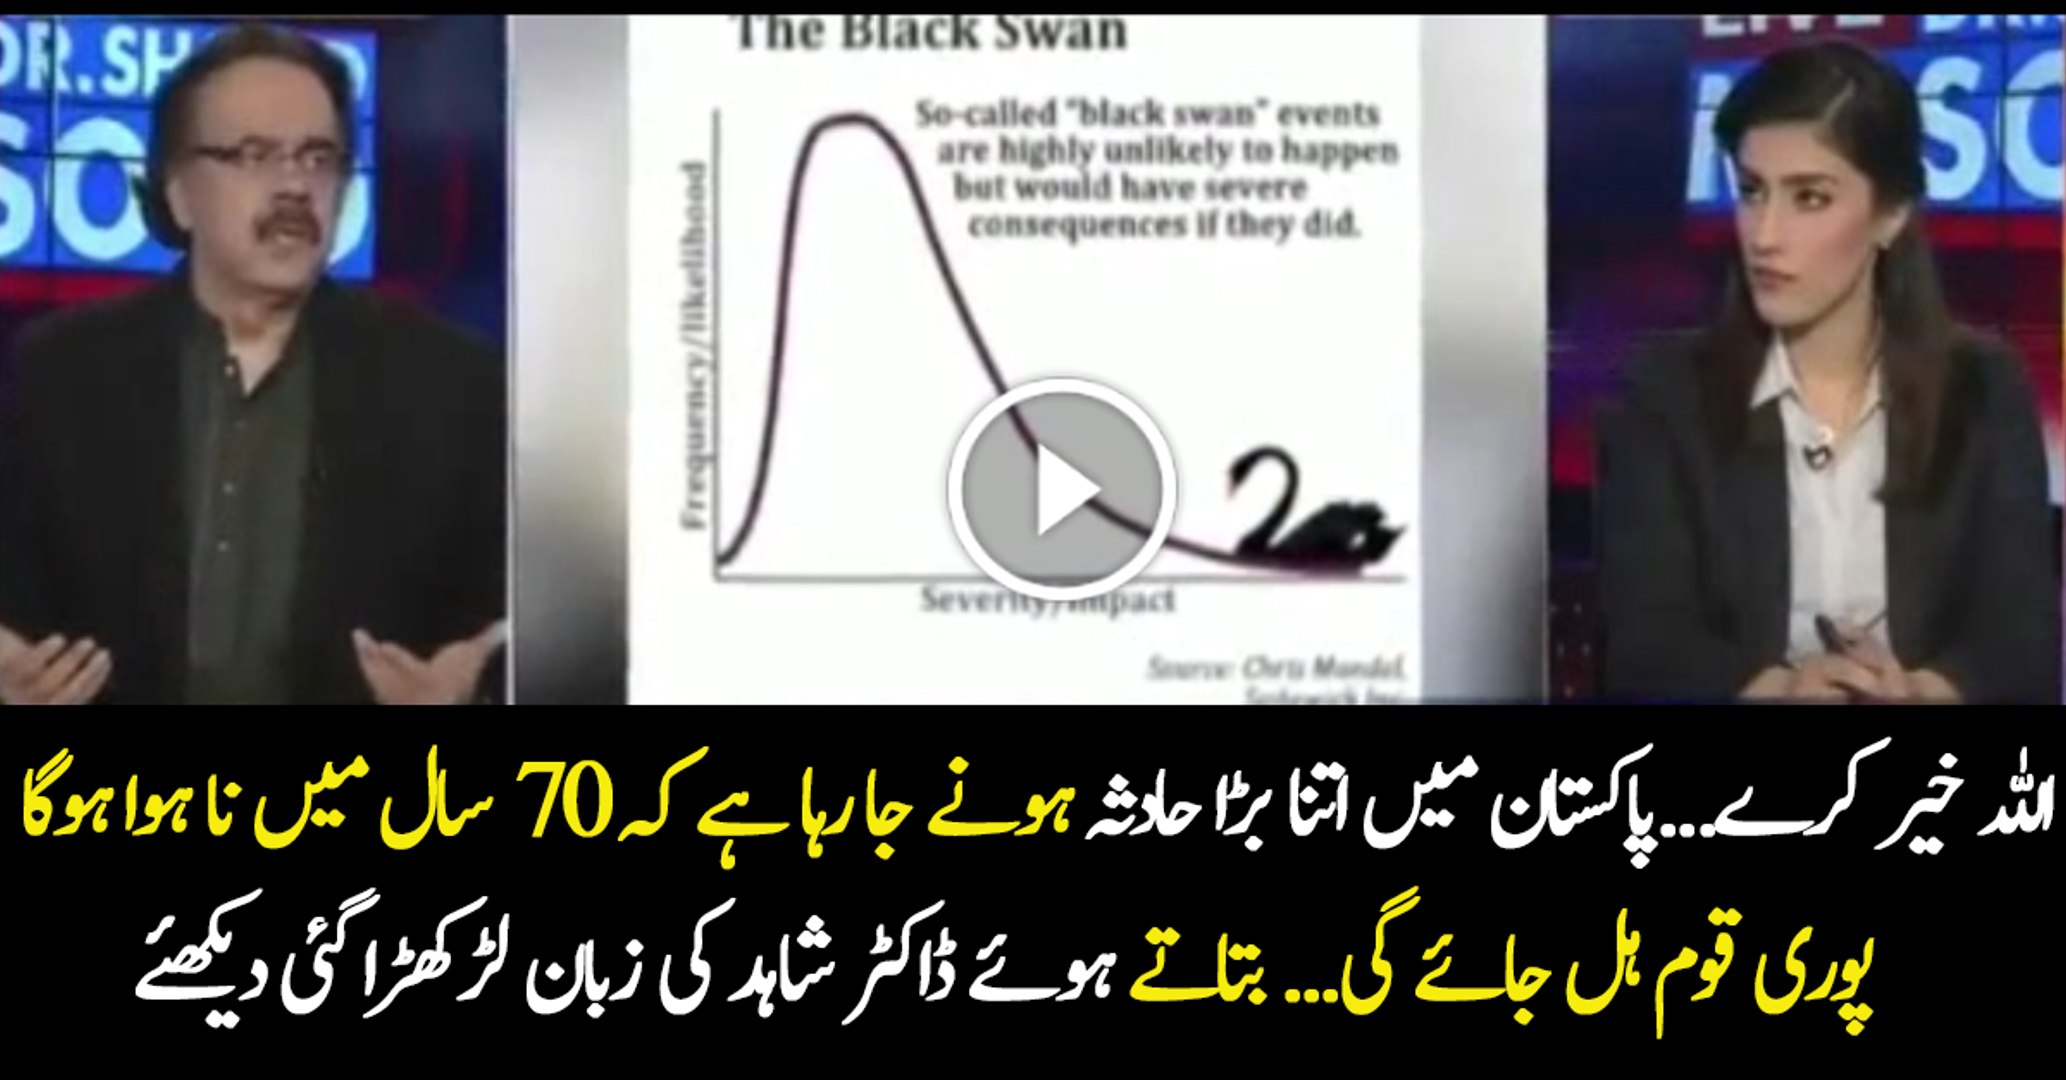 A Black Swan May Happen in Pakistan - Dr Shahid Revealed